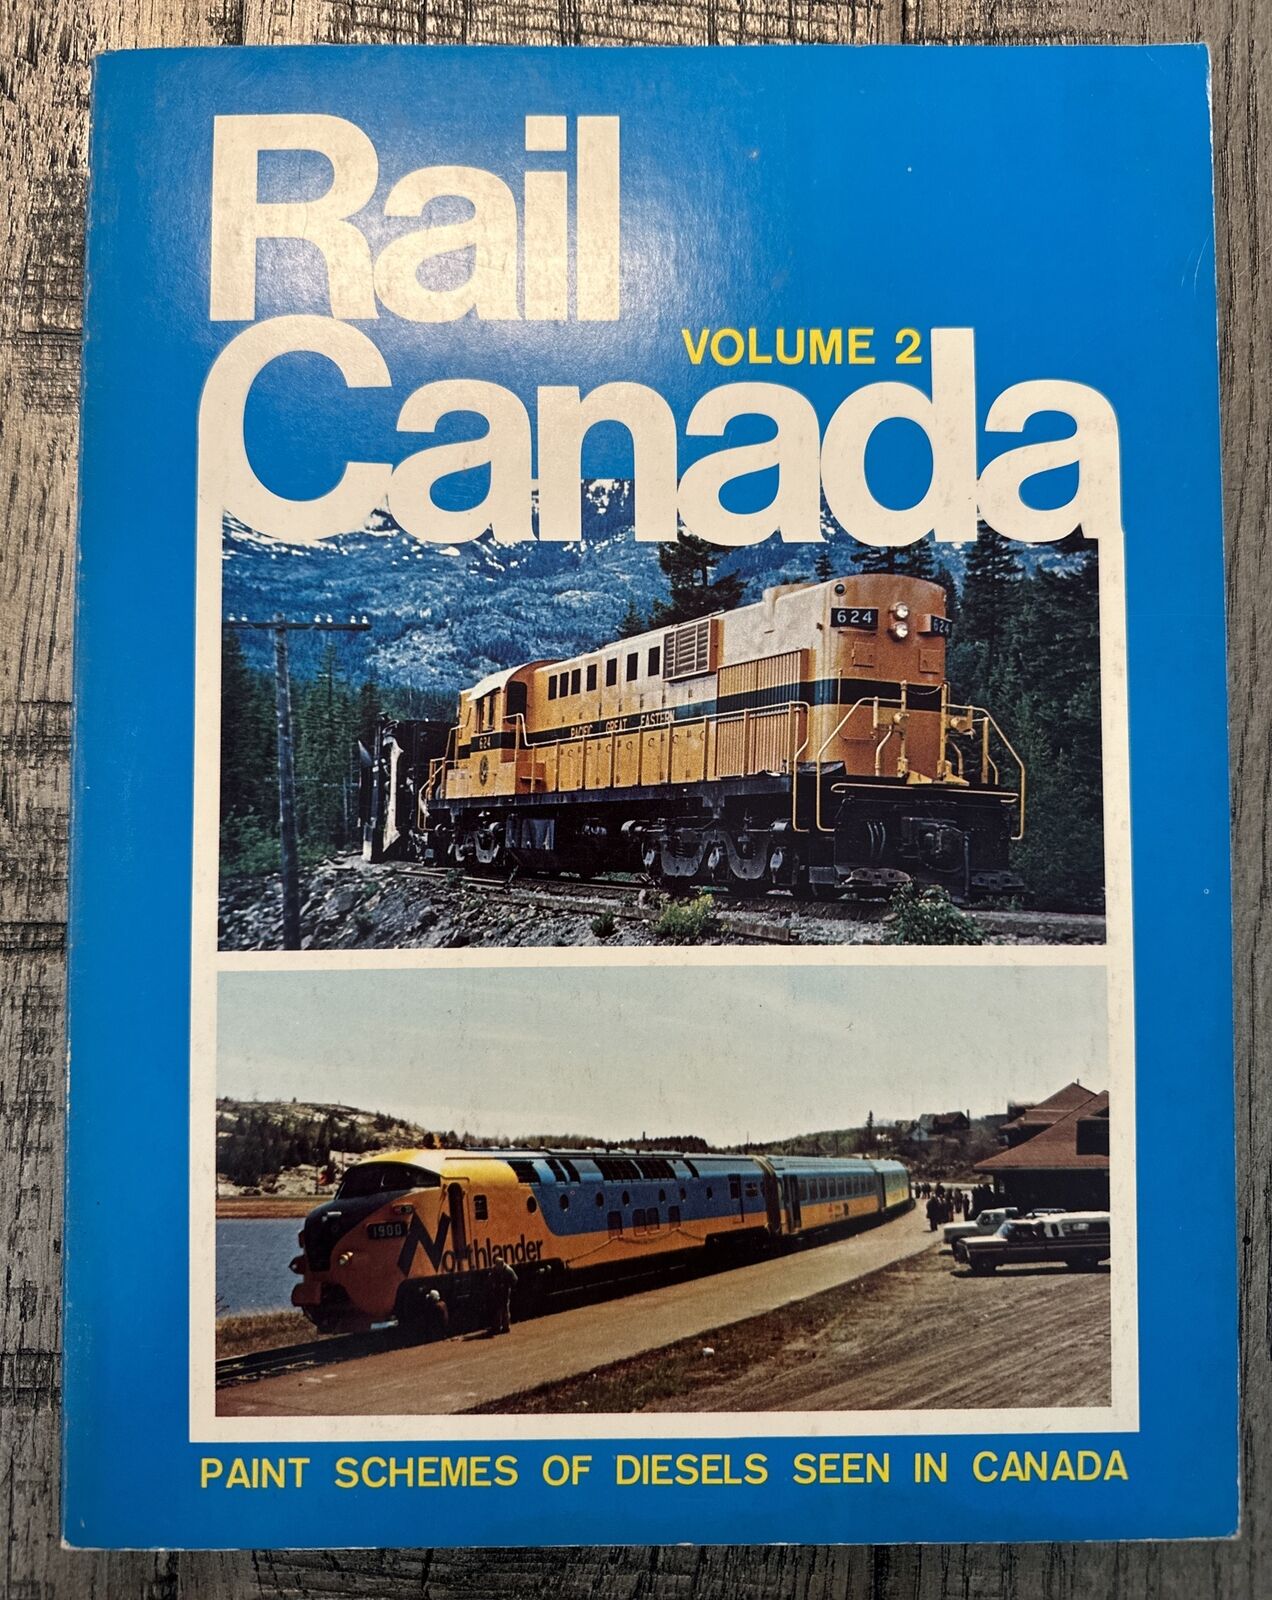 Rail Canada Vol 2 Paint Schemes of Diesels Seen in Canada by Donald C Lewis SC